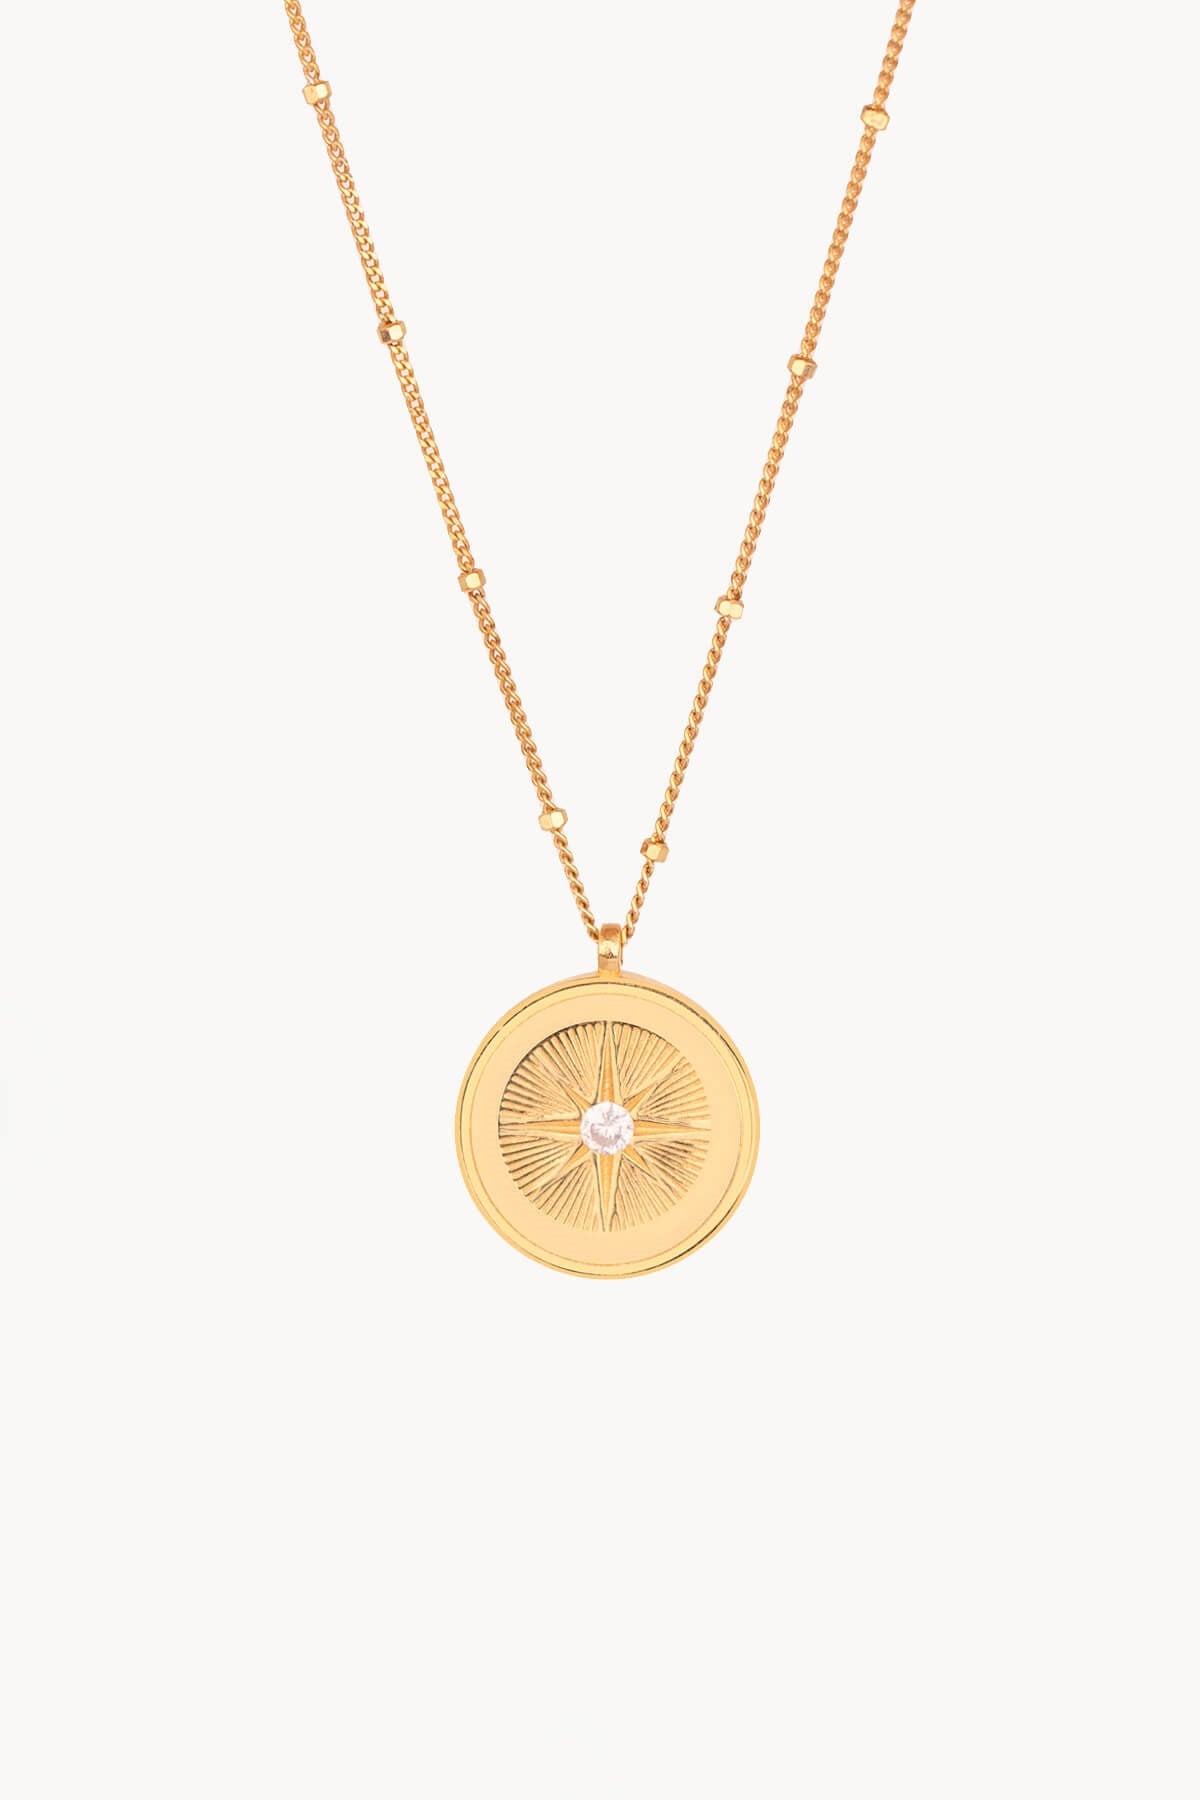 Nord Star Zircon Stone Necklace Gold Plated